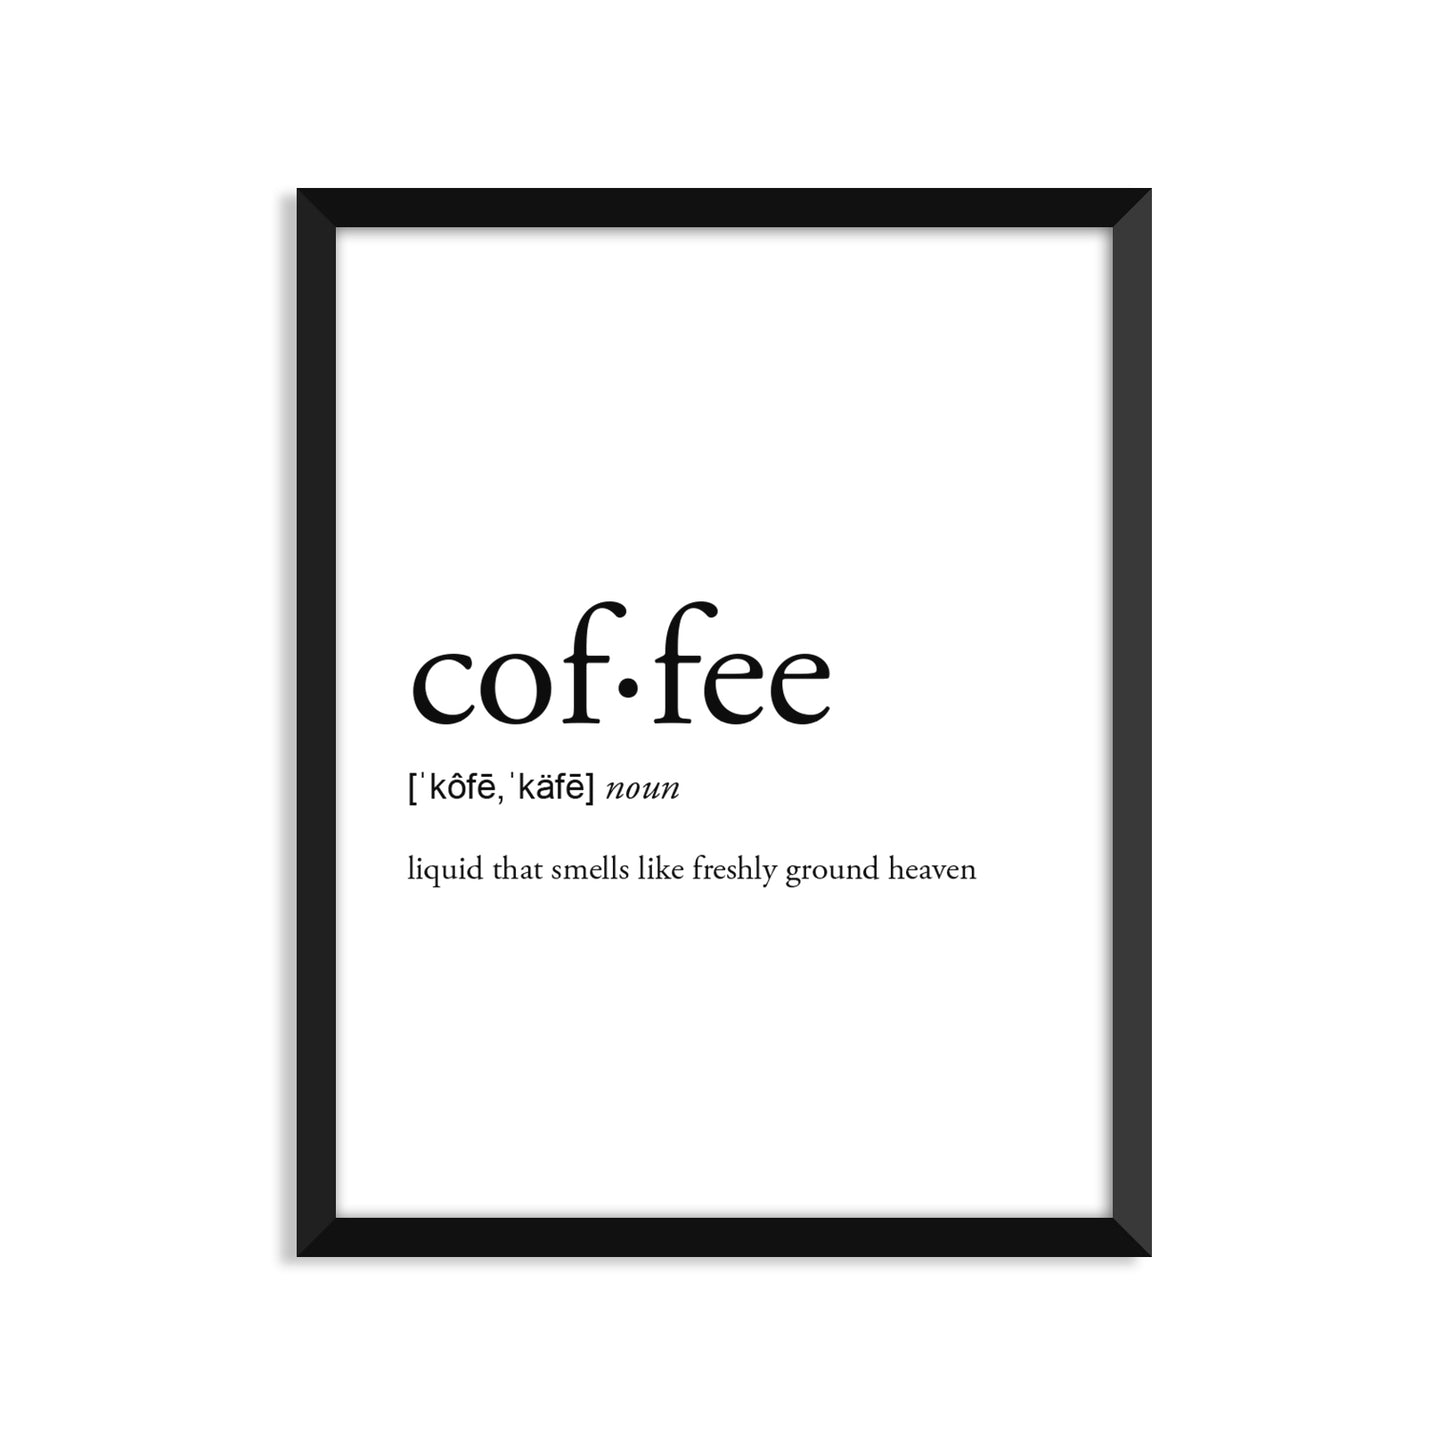 Coffee Definition (magical) Everyday Card